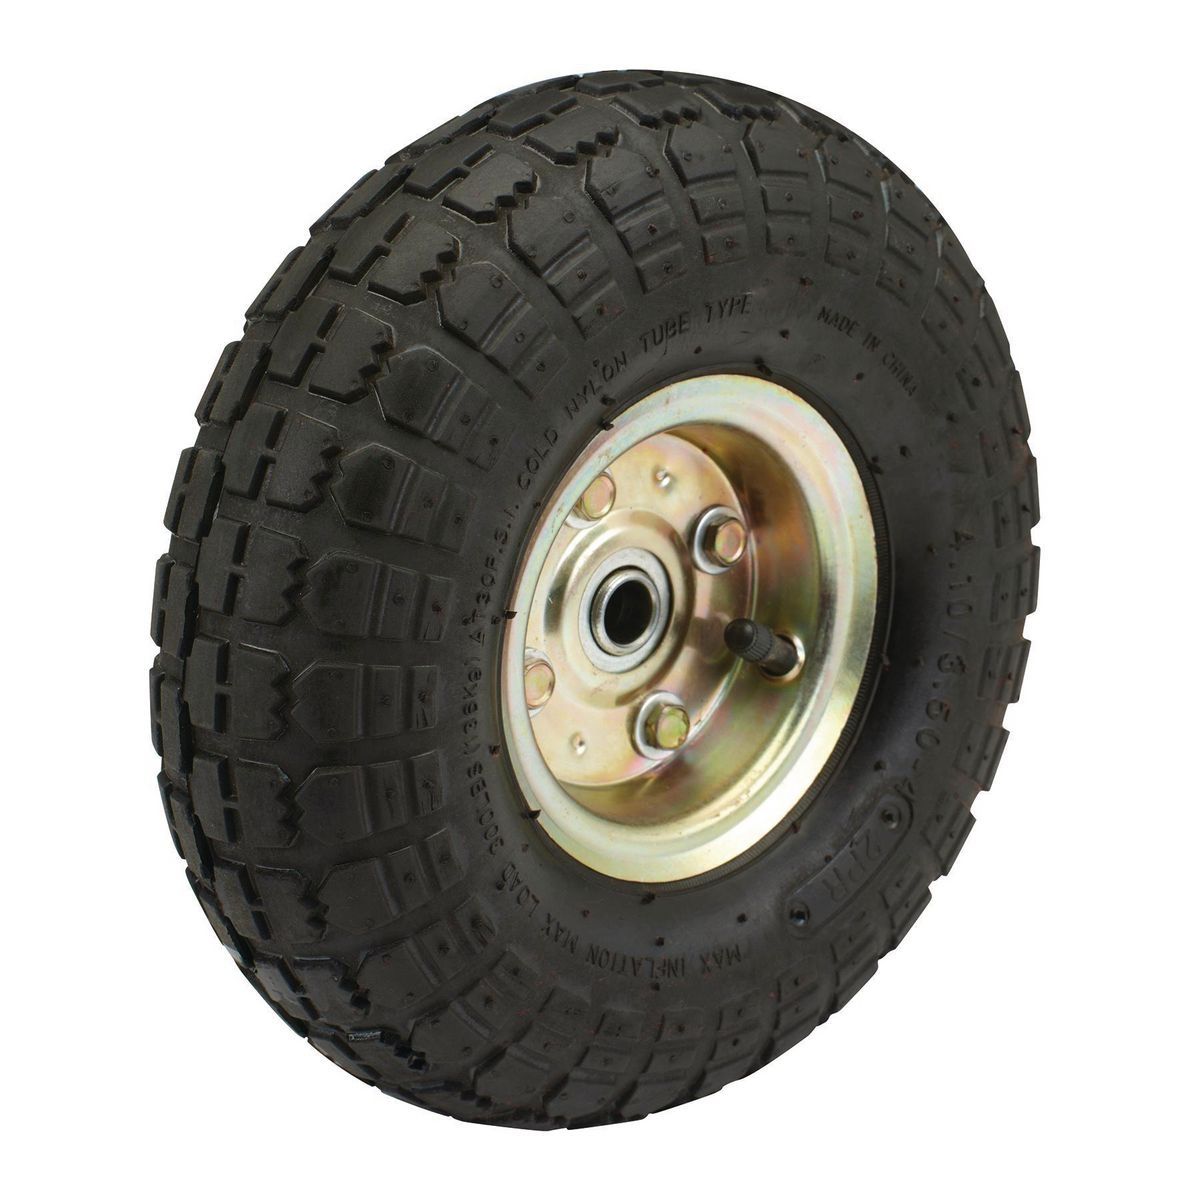 HAUL-MASTER 10" Pneumatic Tire with Gold Hub